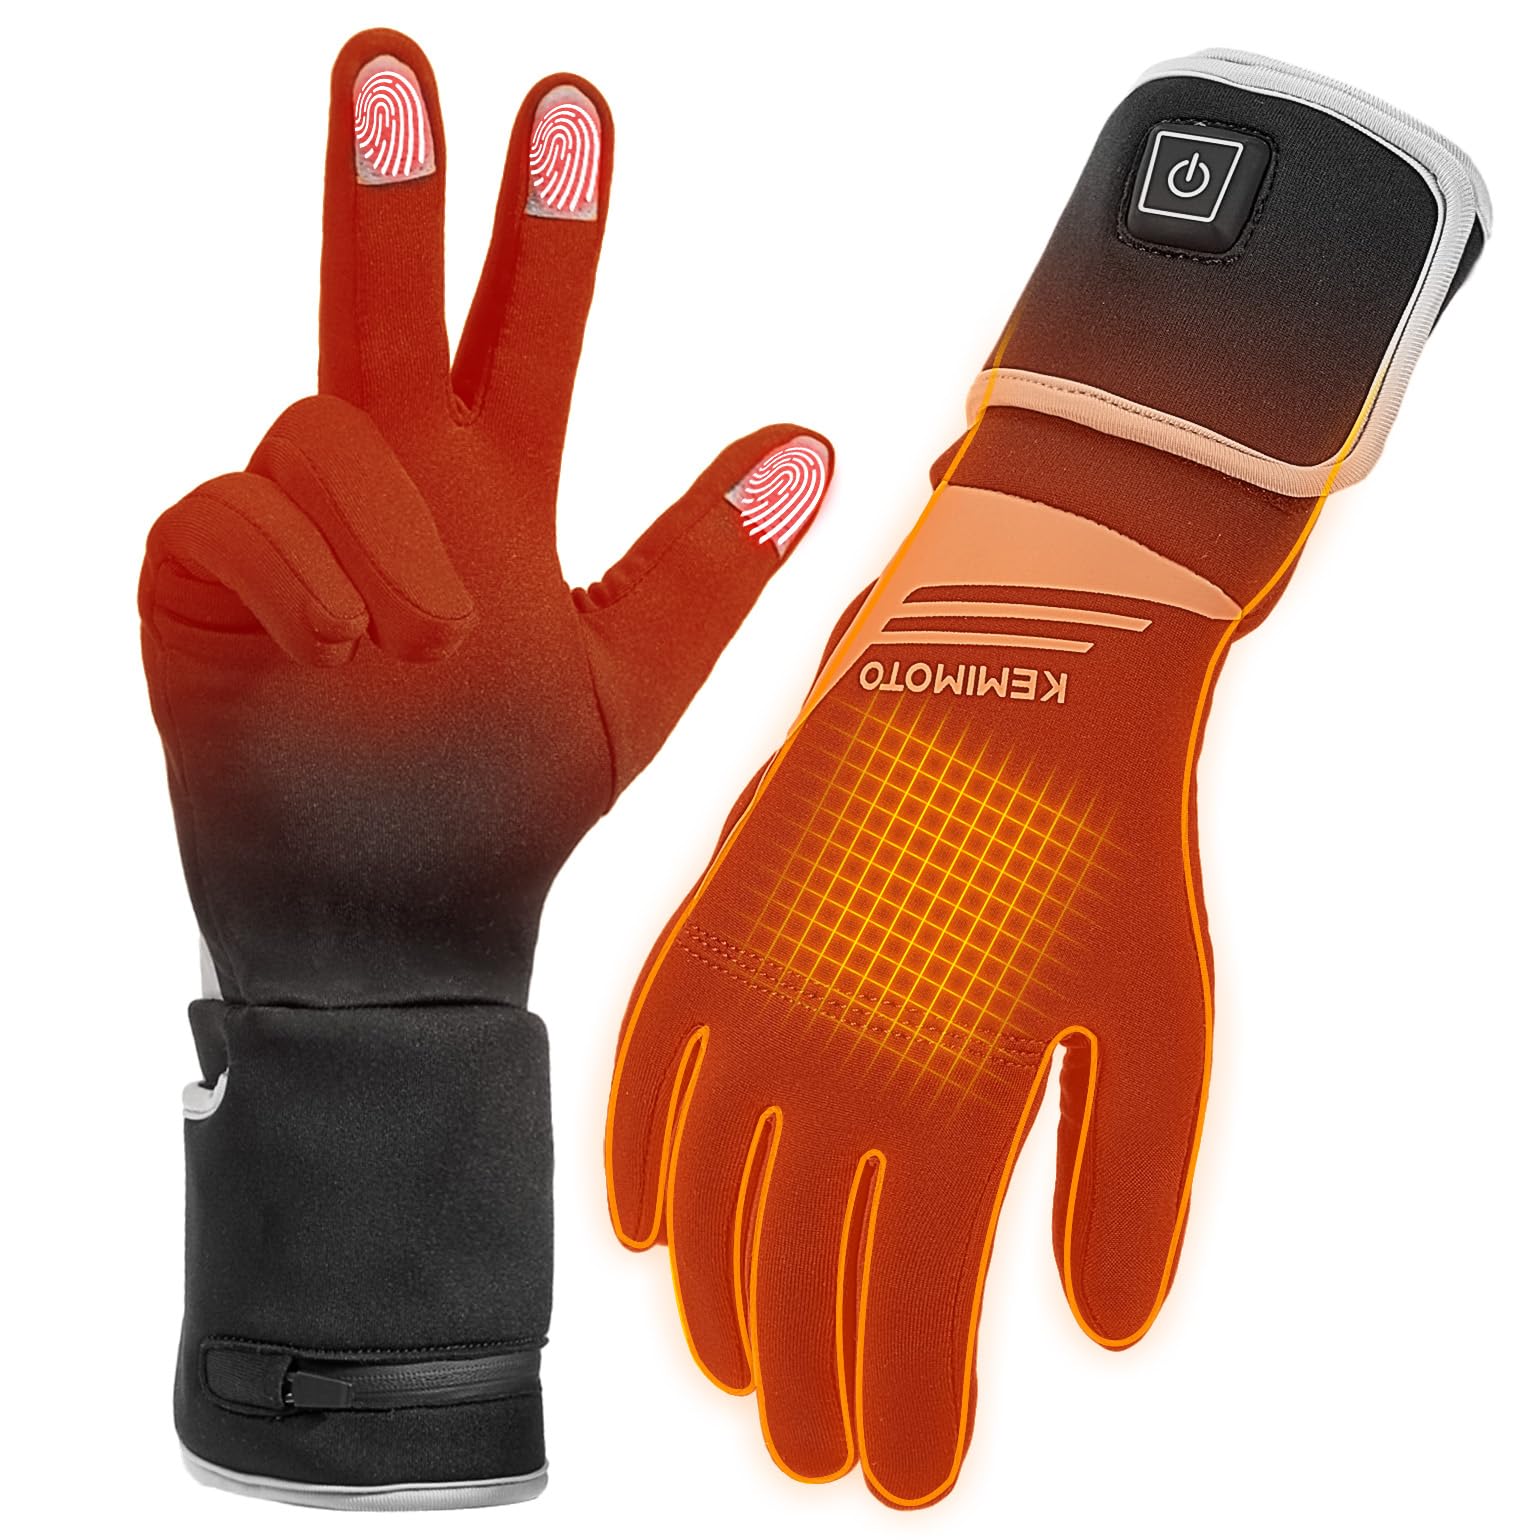 Ice Fishing Rechargeable Waterproof Heated Gloves - KEMIMOTO, L